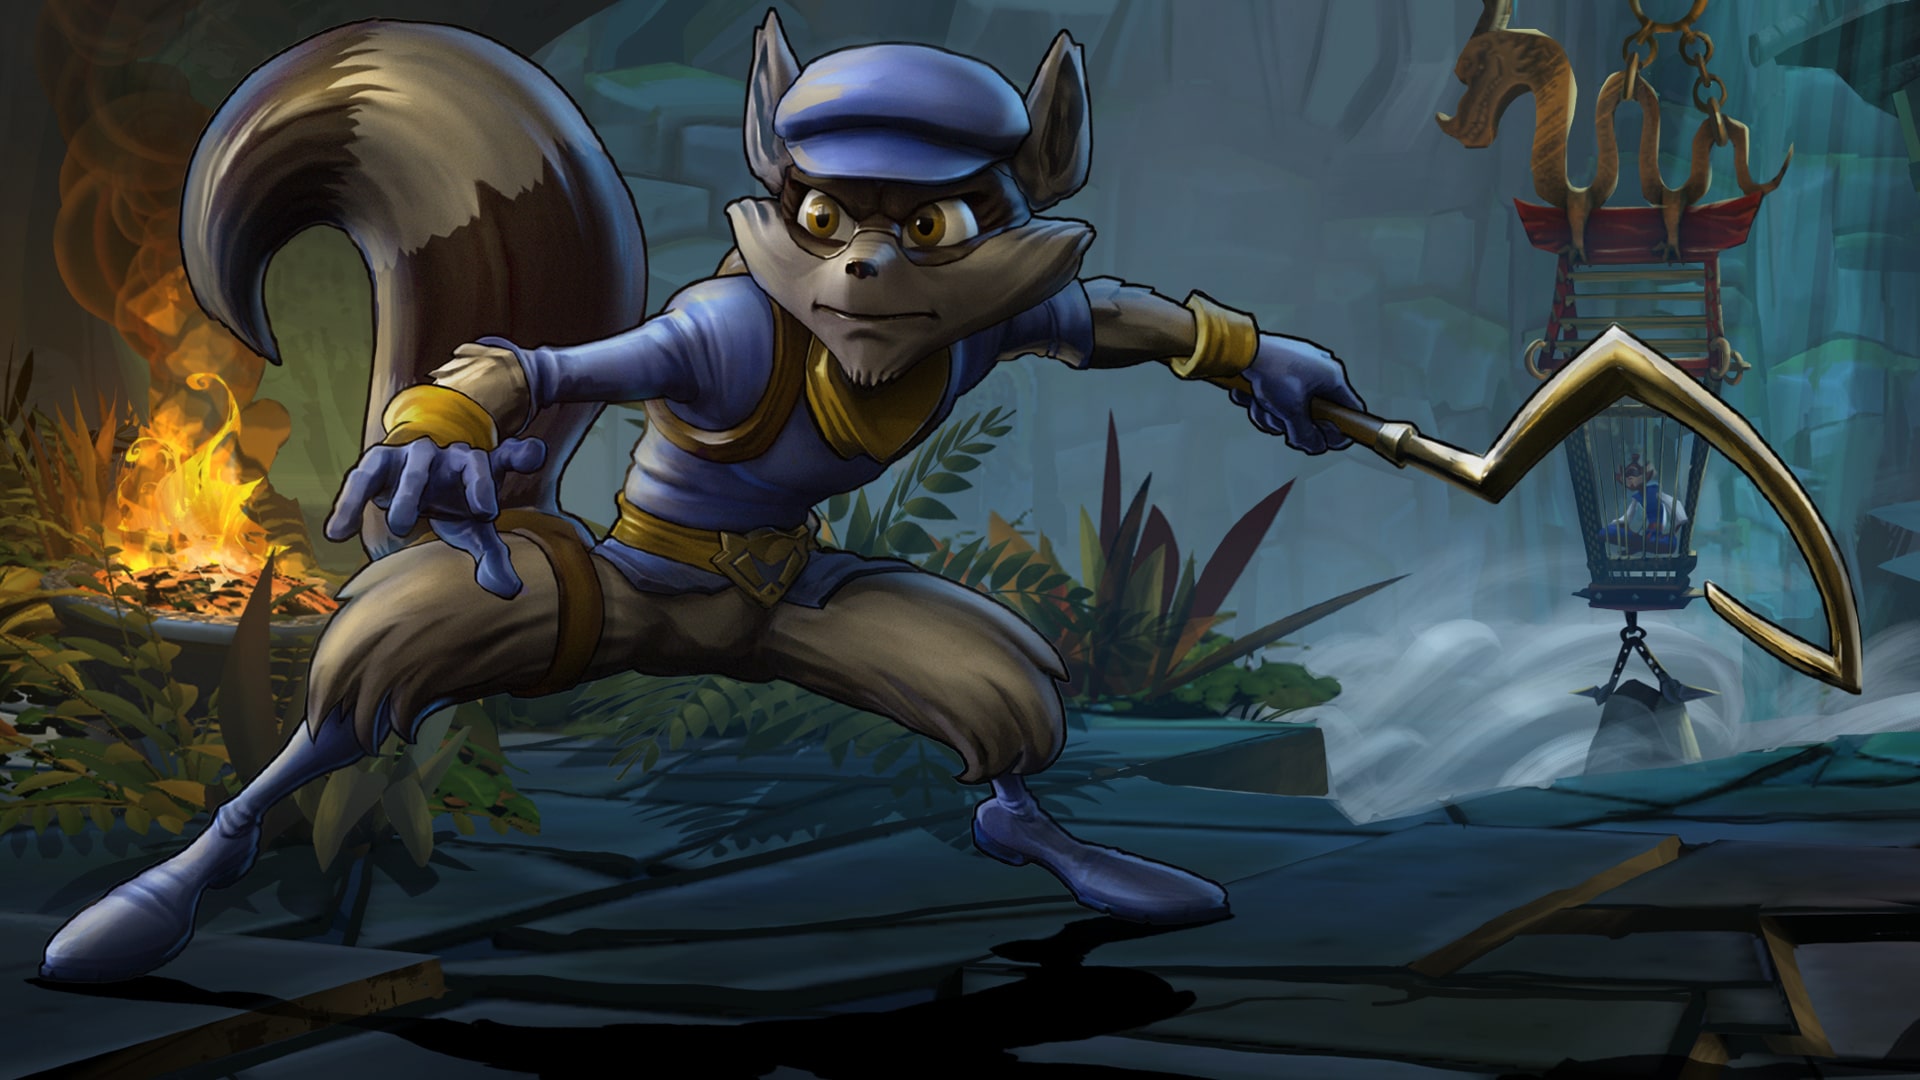 Sucker Punch Clarifies That No Sly Cooper or Infamous Games Are Currently In Development